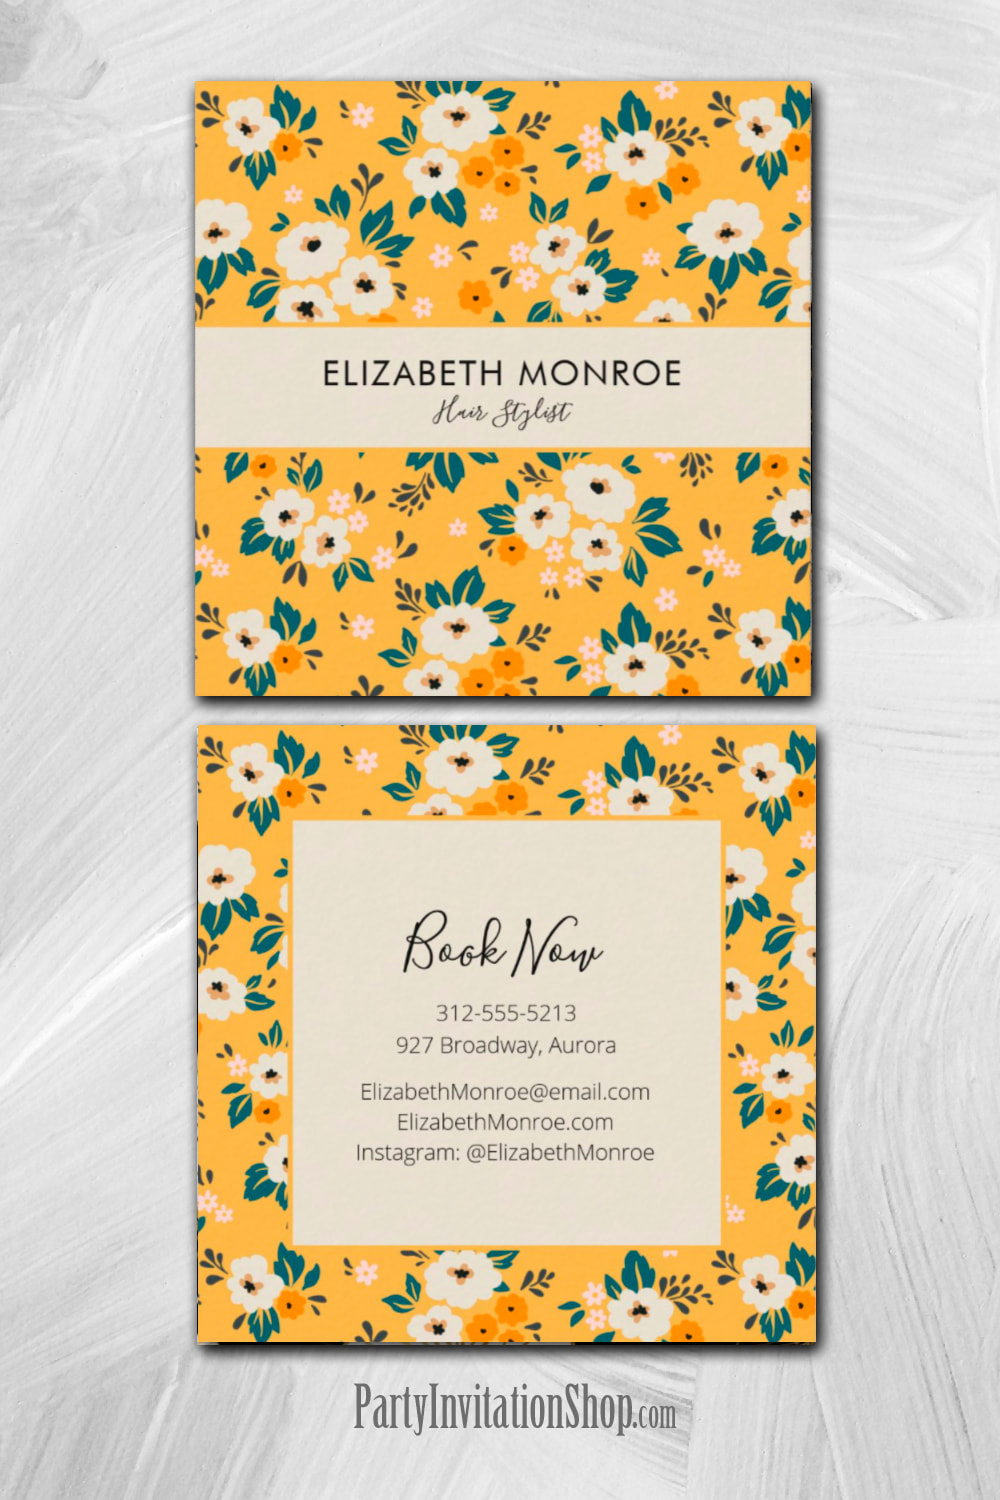 Floral Square Business Cards Hair Stylist, Makeup Artist